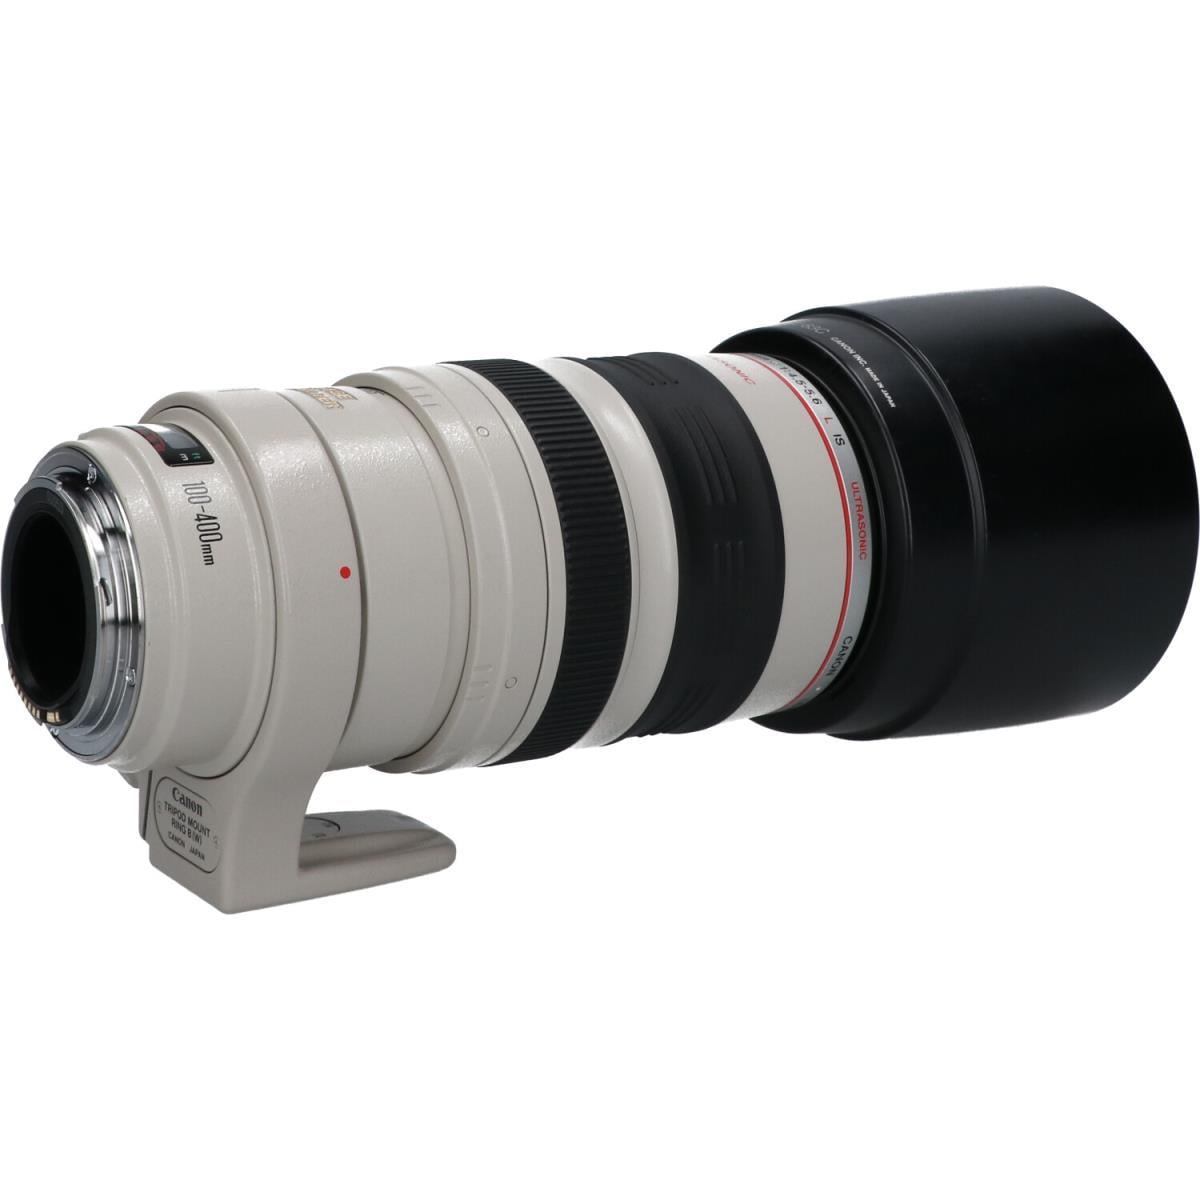 CANON EF100-400mm F4.5-5.6L IS USM